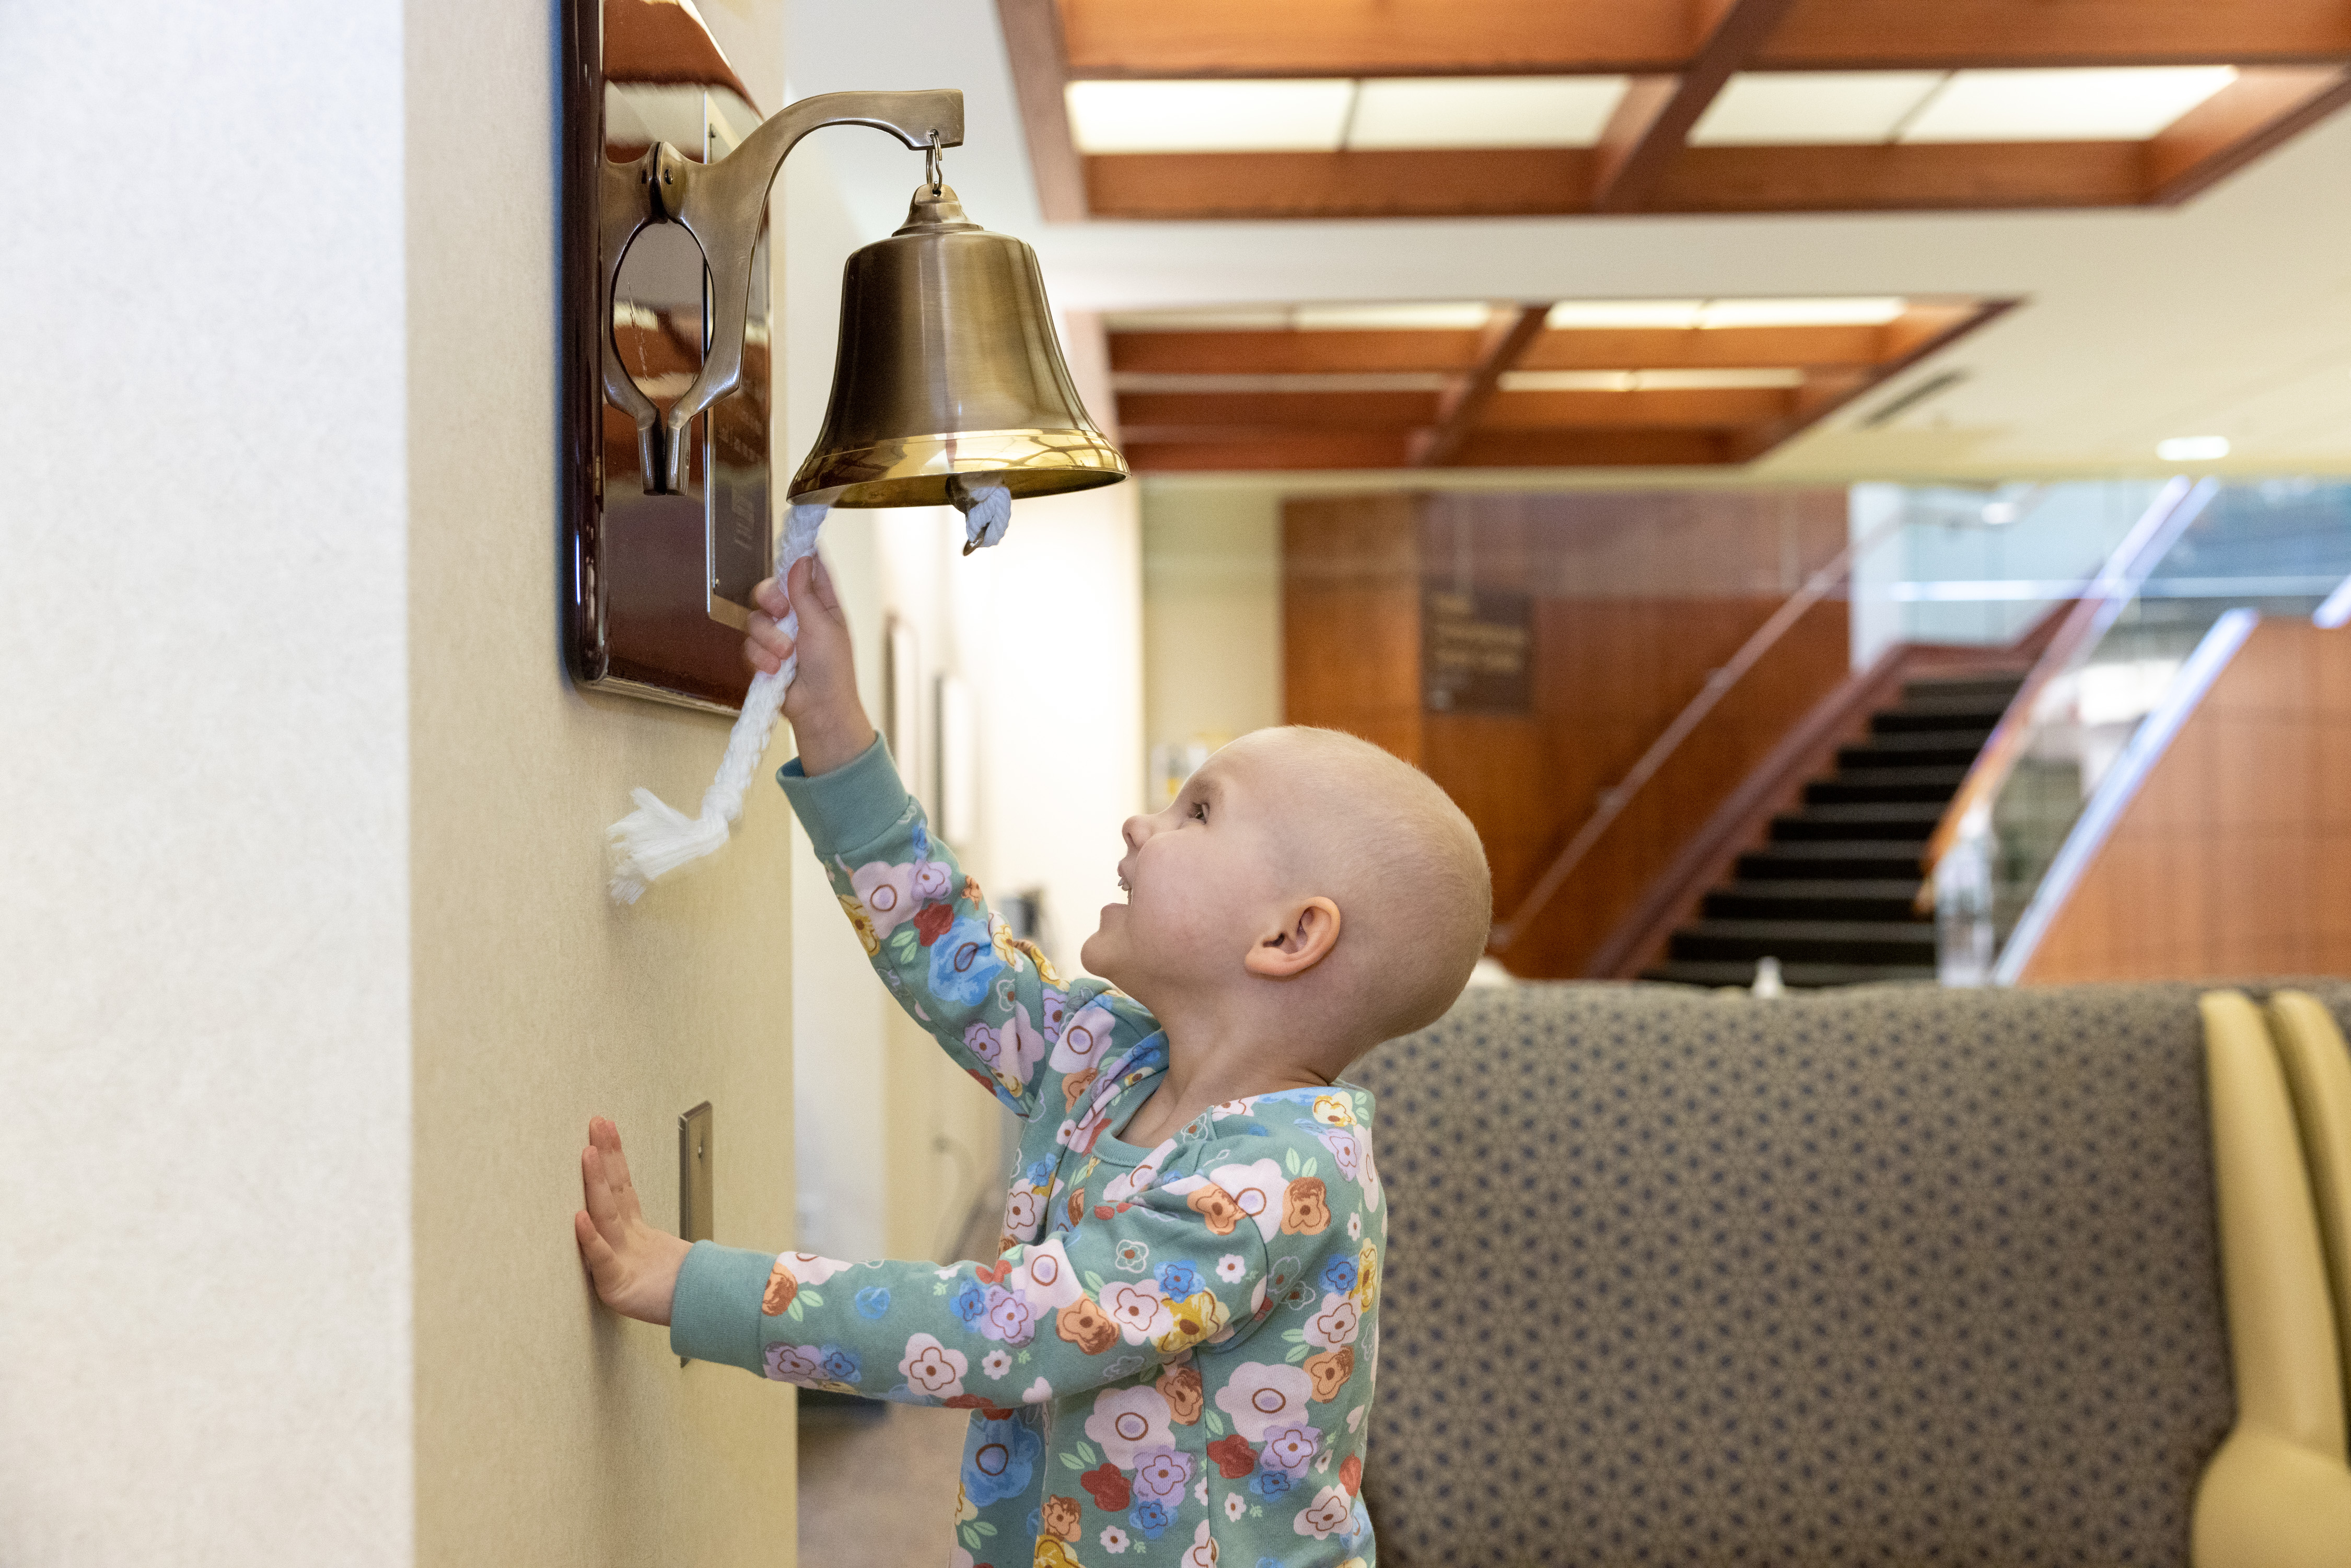 Pediatric patient rings bell after final cancer treatment.